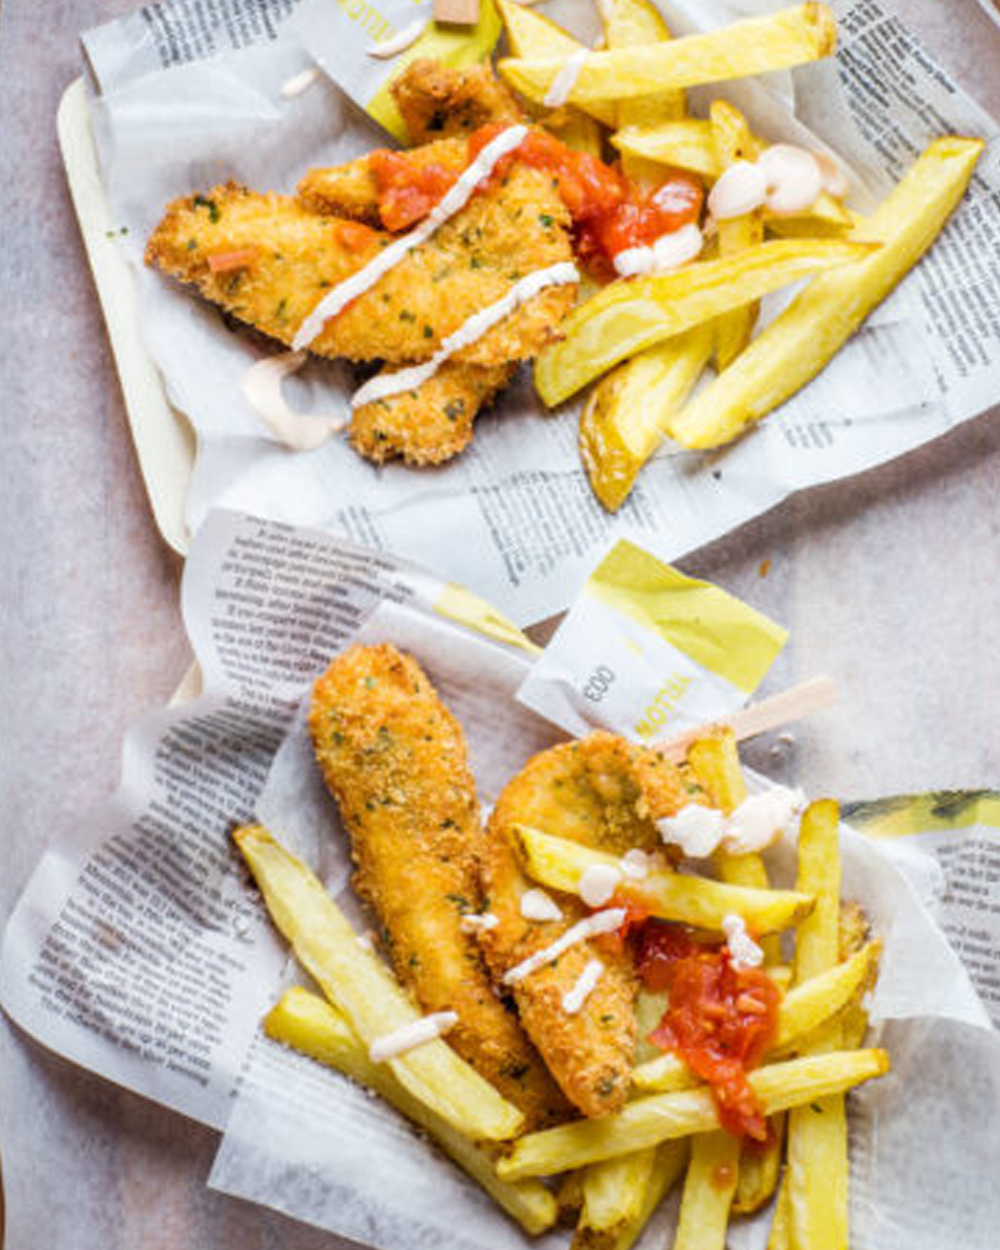 aucklands-best-fish-n-chips_featured-image-1000x1250